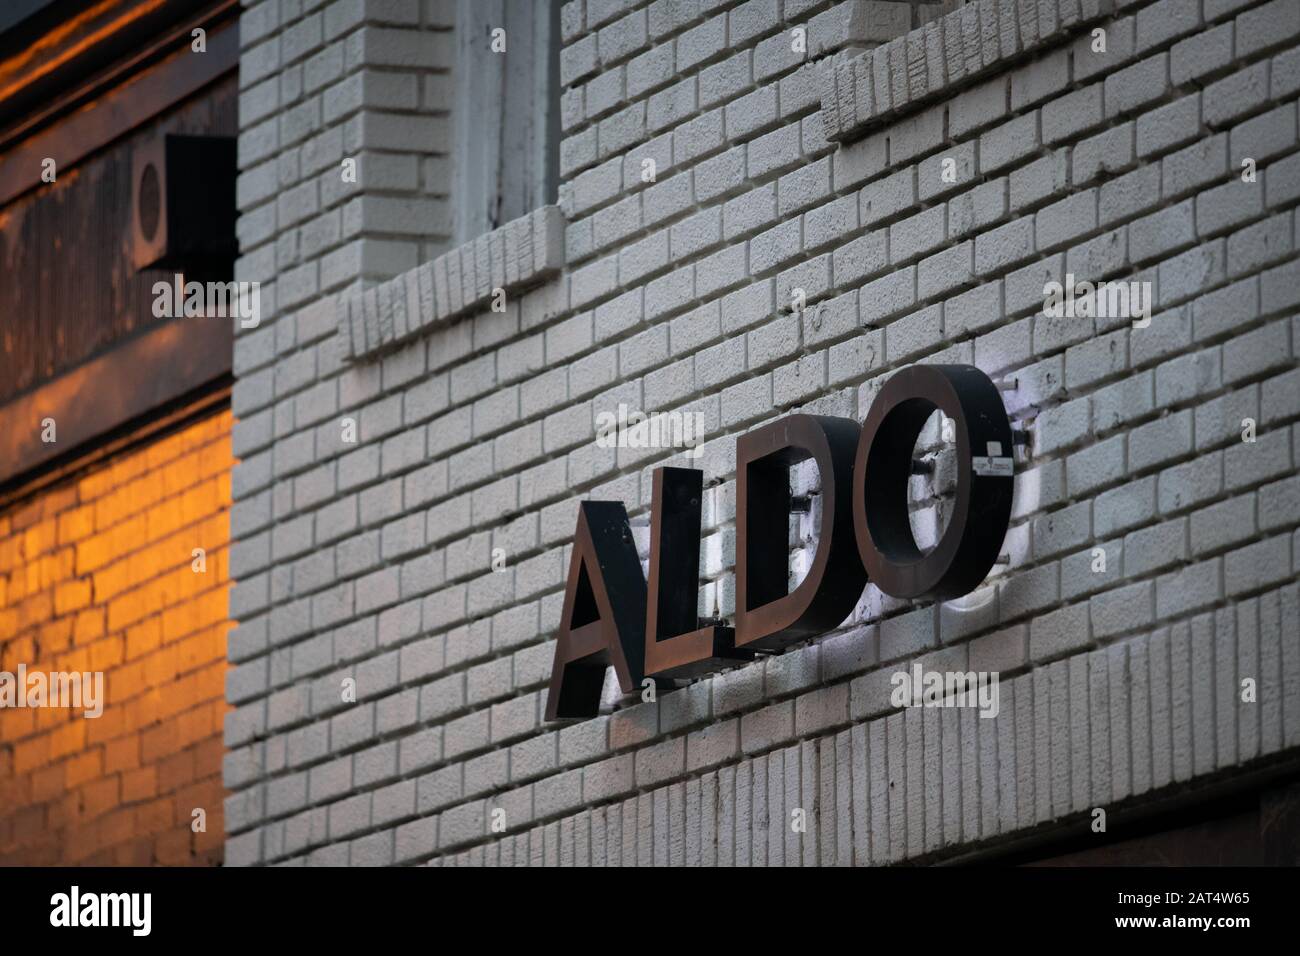 Aldo Accessories High Resolution Stock Photography and Images - Alamy